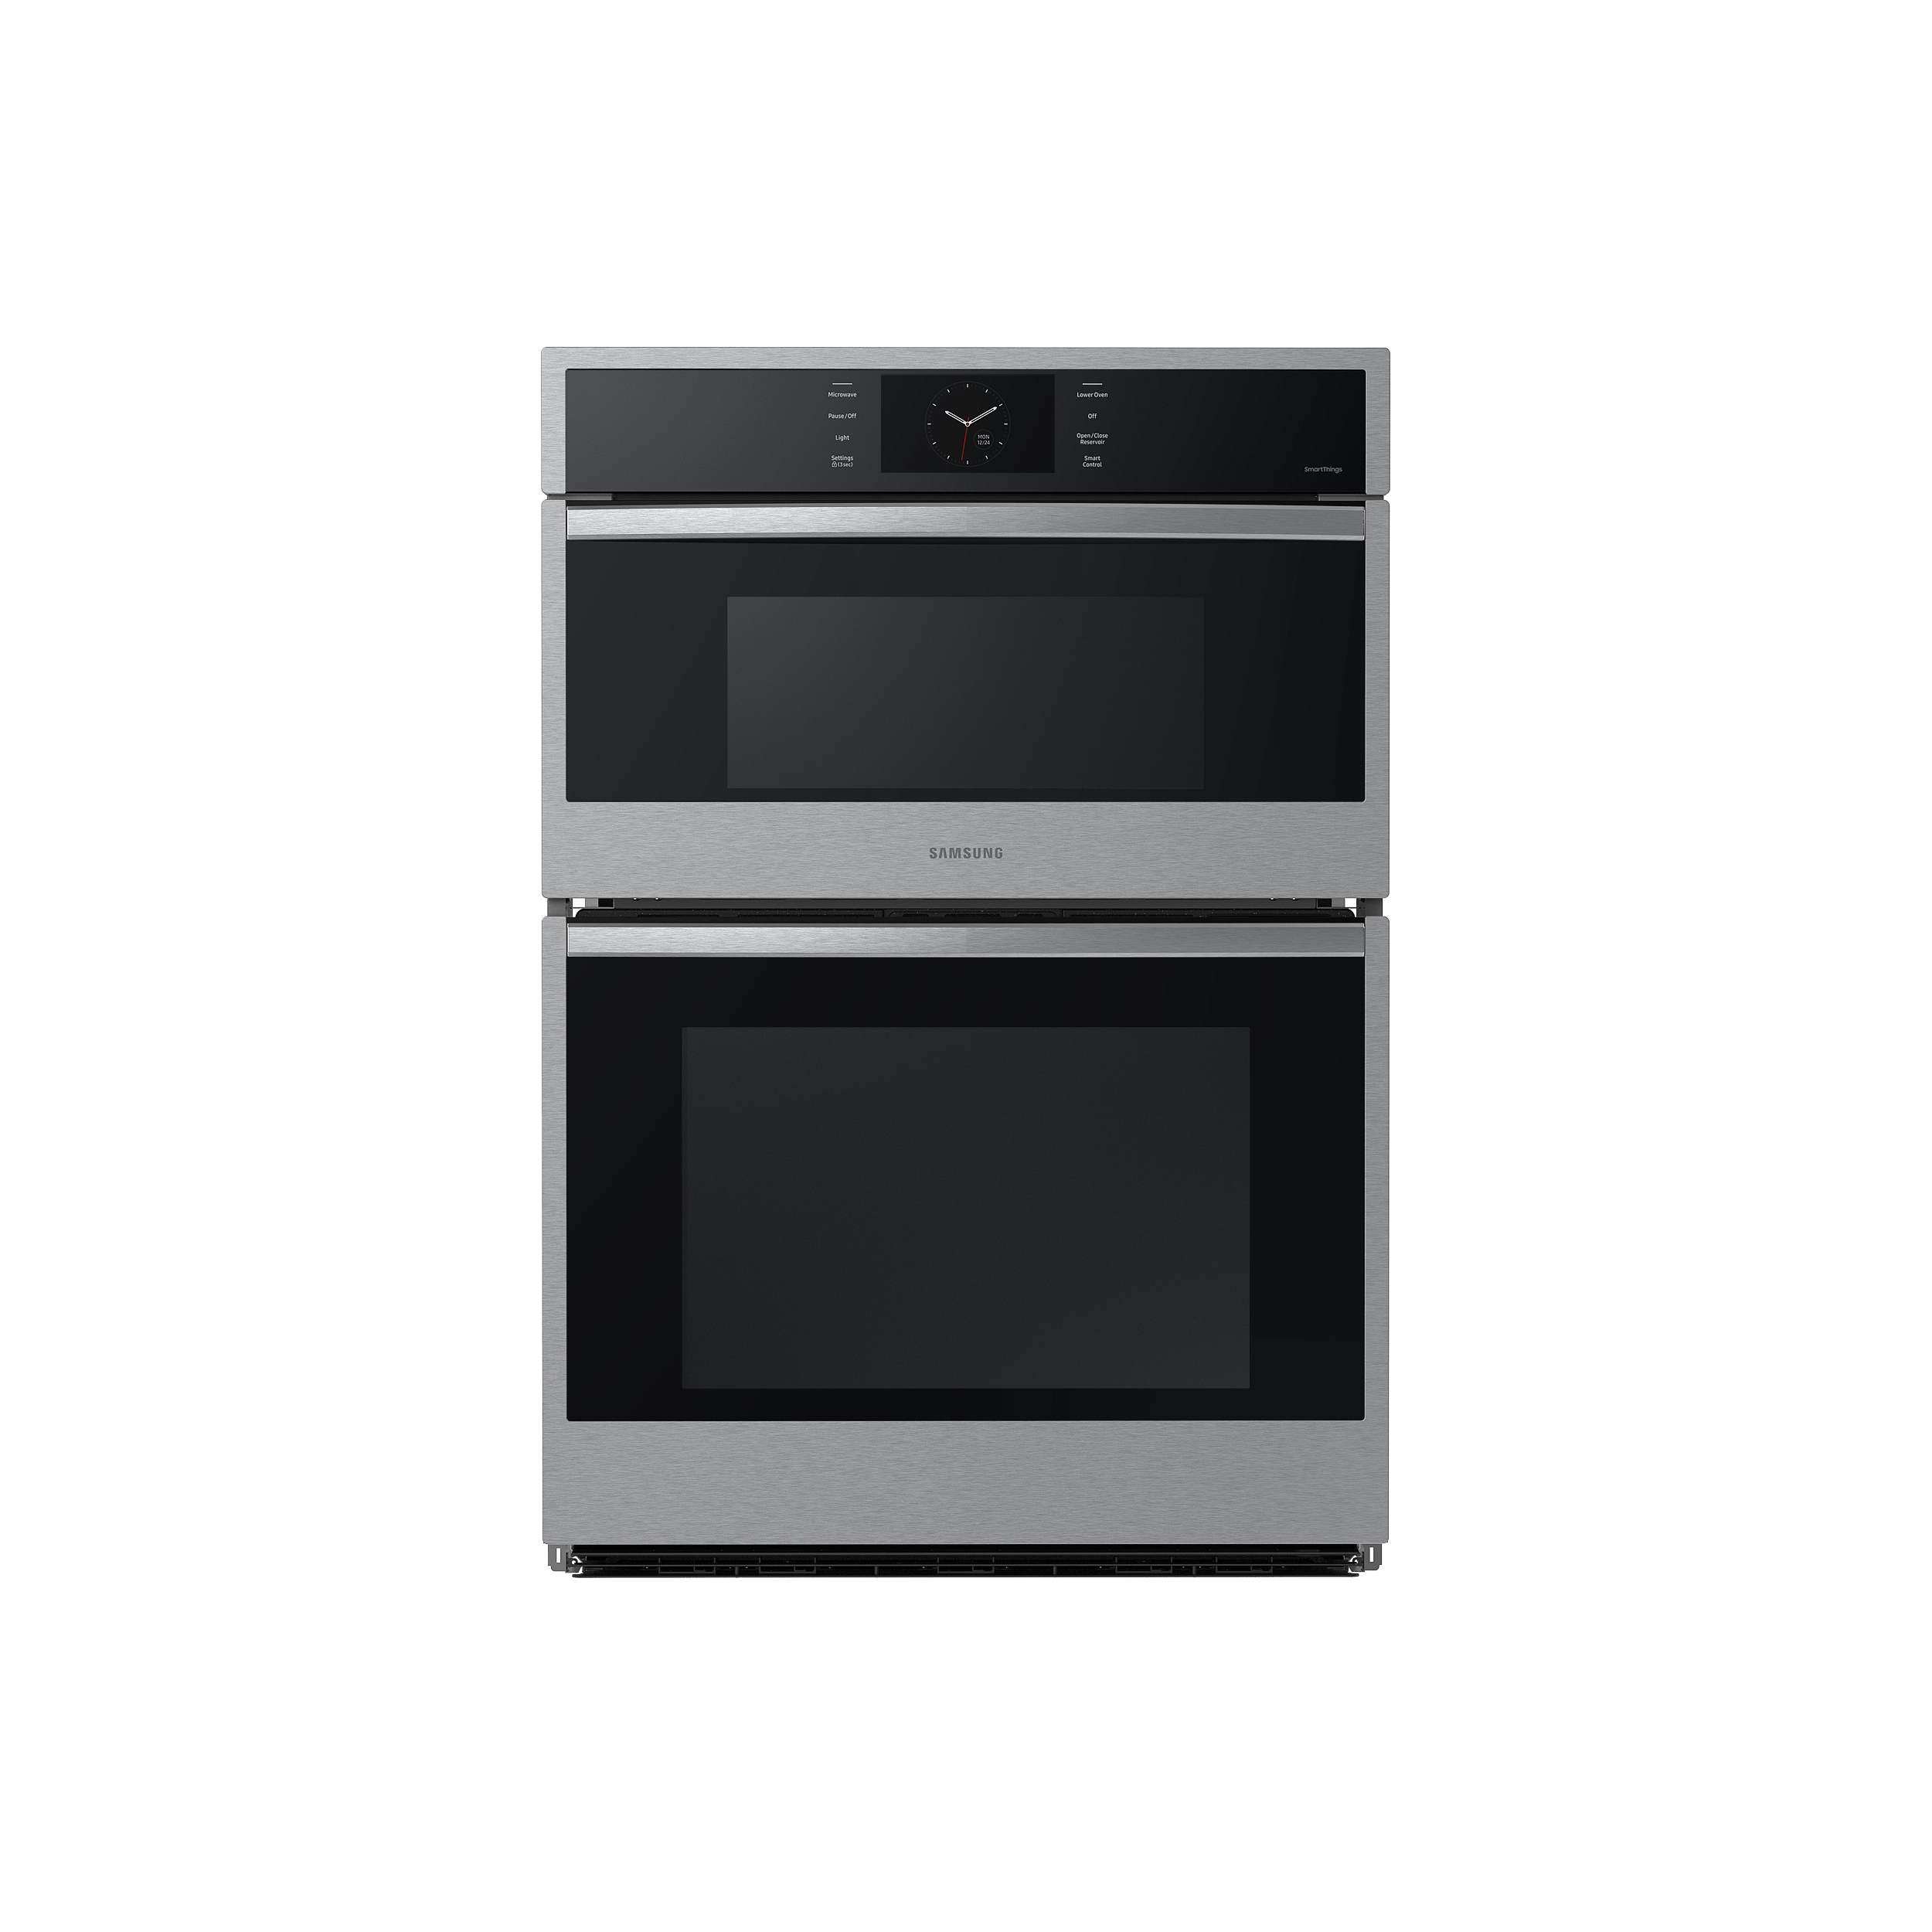 Commercial Combi Oven Buying Guide - Buying Guides